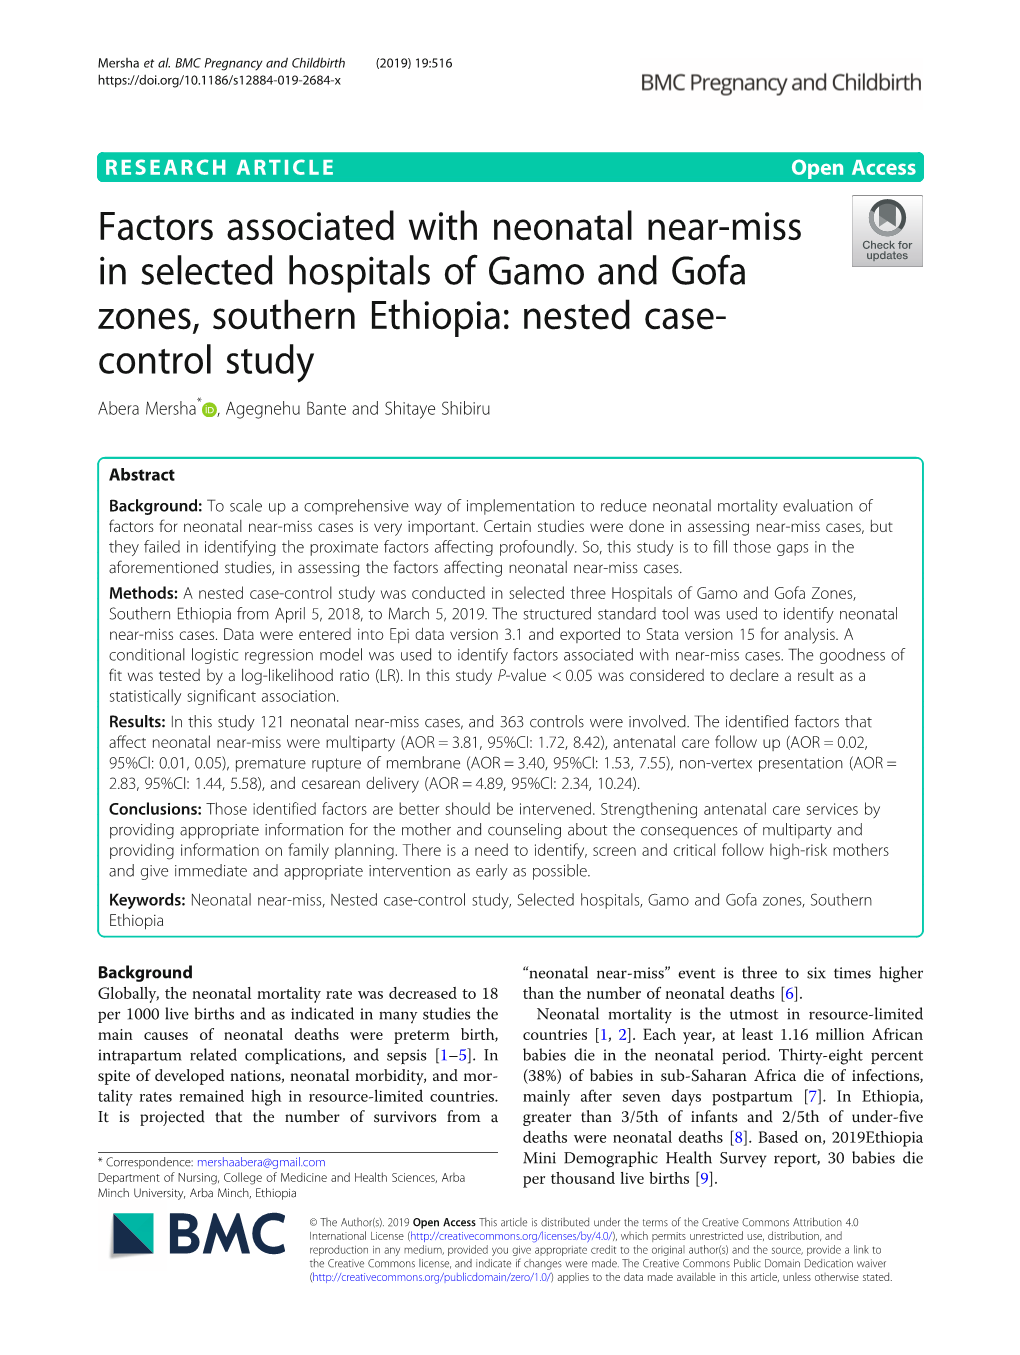 Factors Associated with Neonatal Near-Miss in Selected Hospitals of Gamo and Gofa Zones, Southern Ethiopia